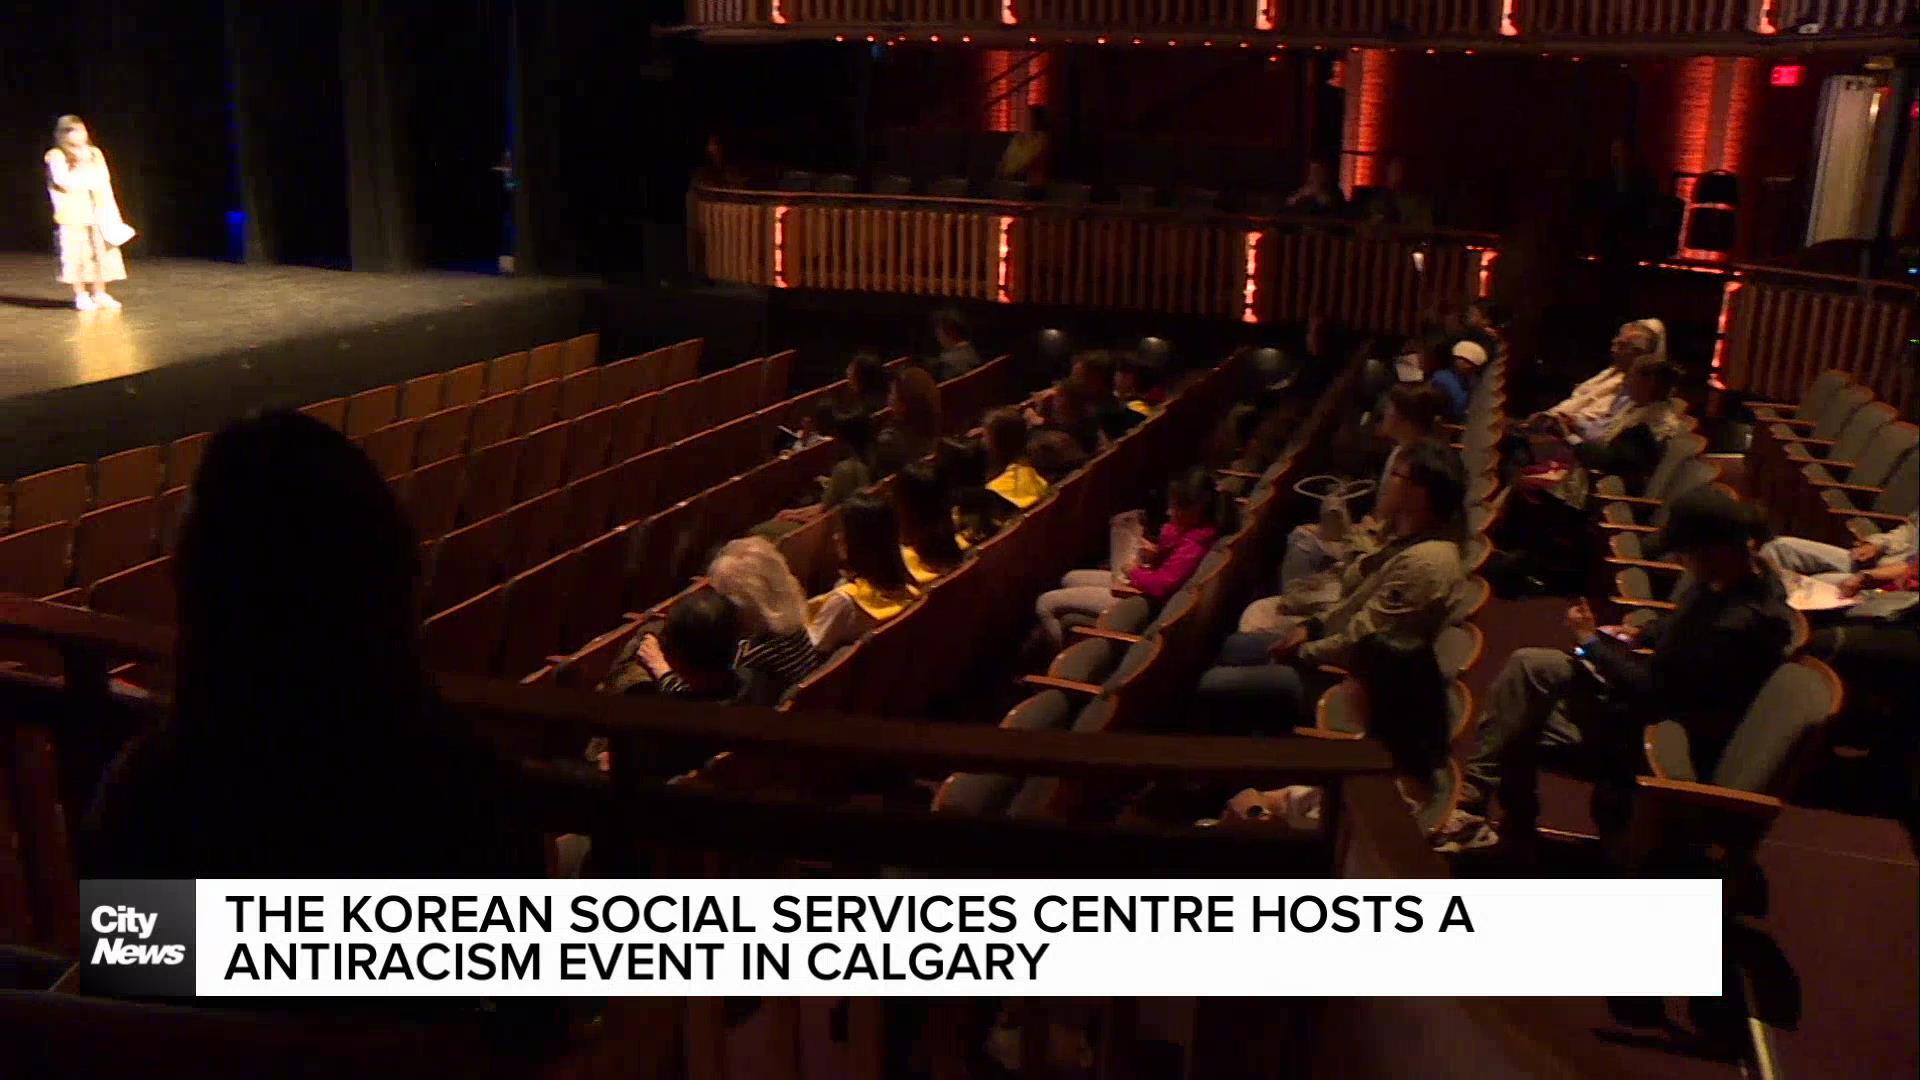 The Korean Social Services Centre hosts antiracism event in Calgary